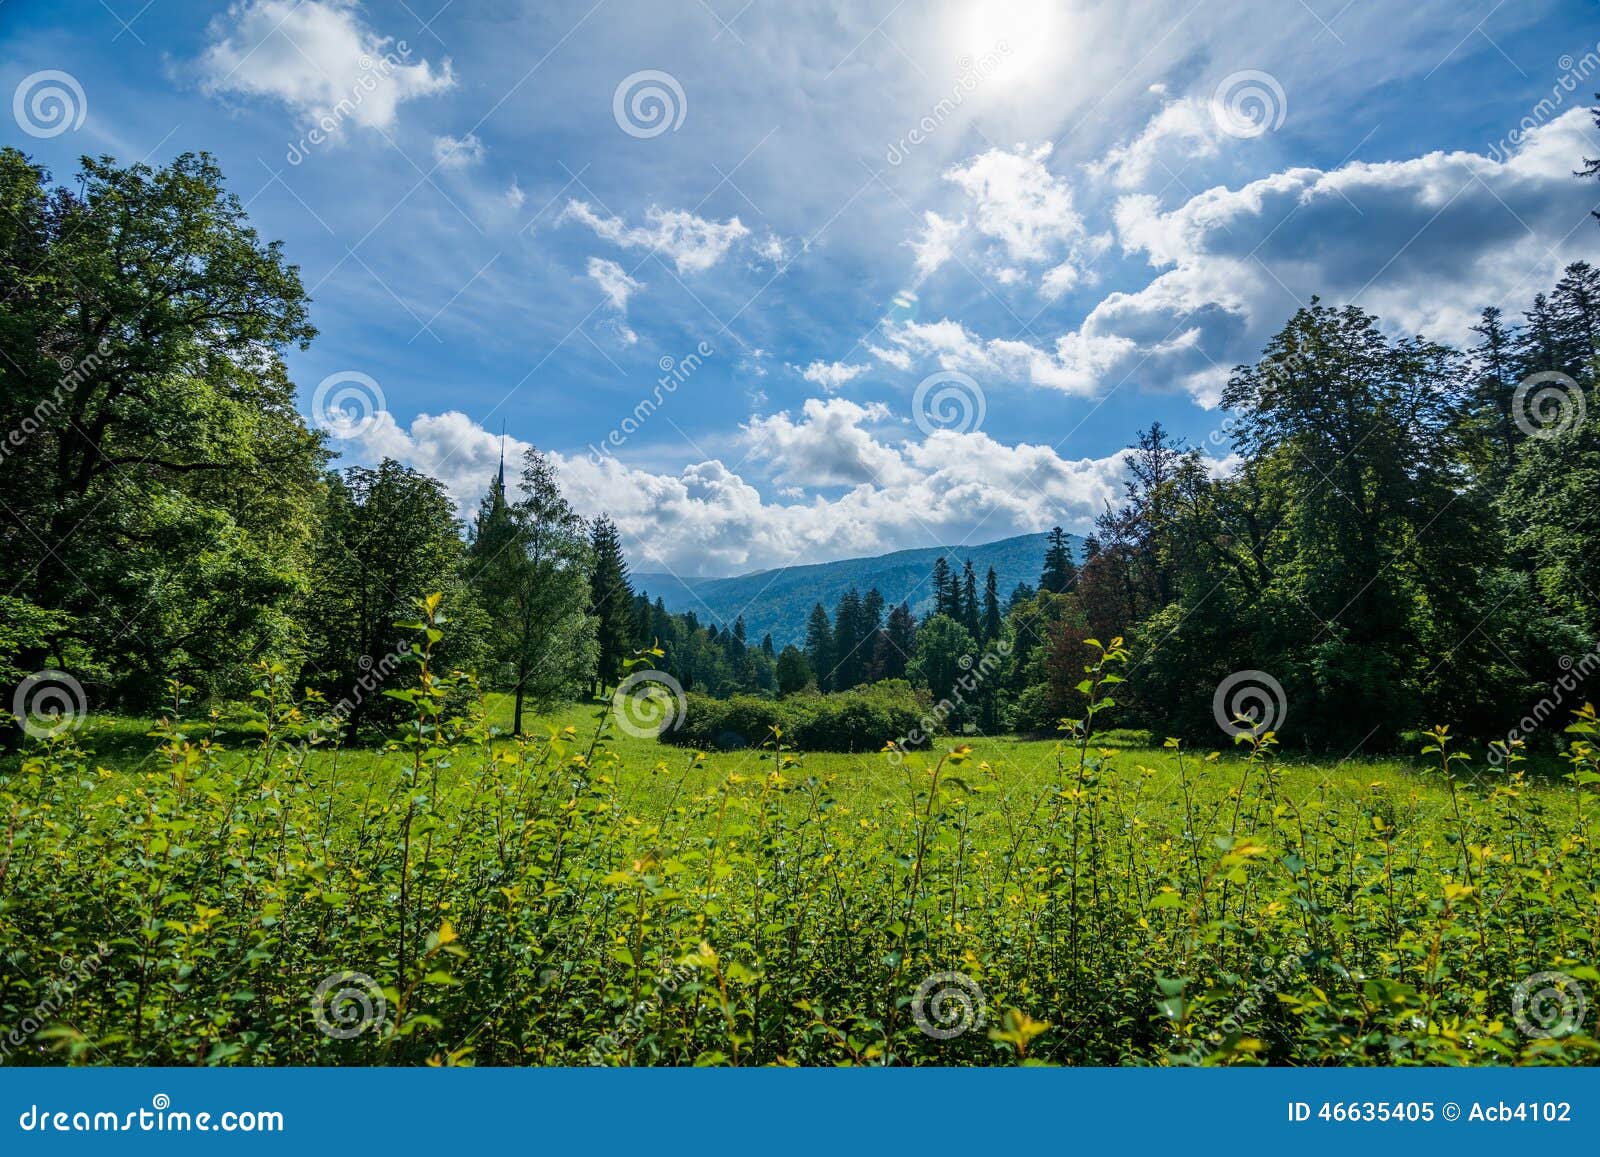 Summer Midday In The Mountains Stock Image - Image of midday, white